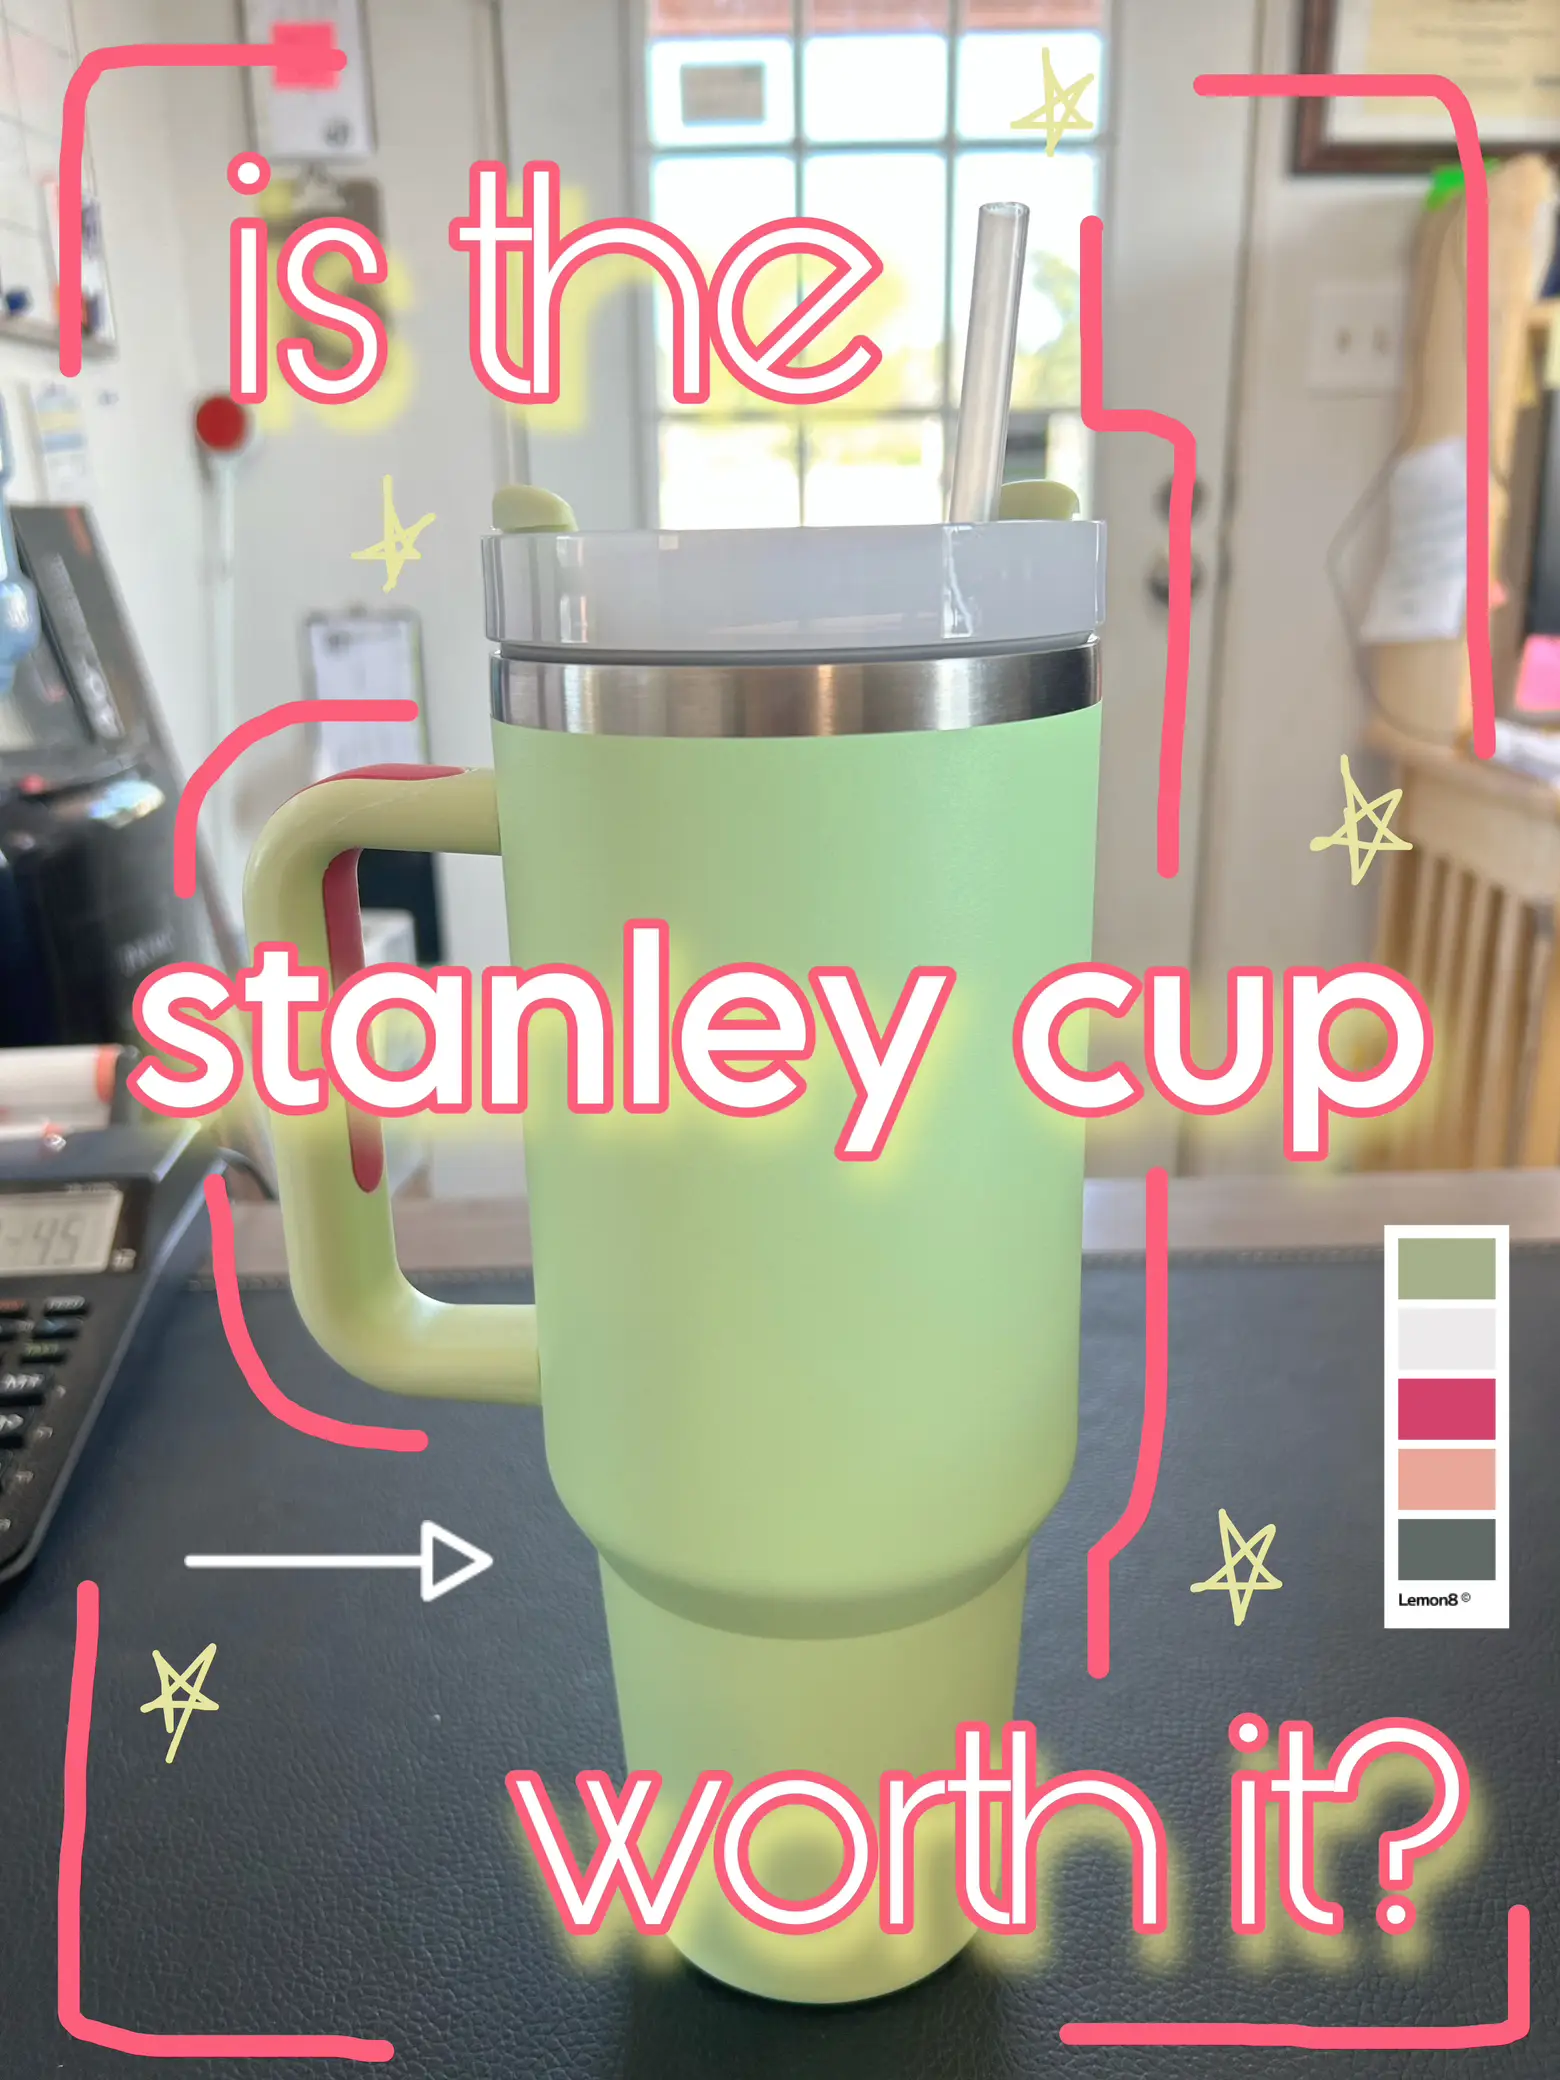 This $30 tumbler is a cheaper (and better) dupe for the viral Stanley cup